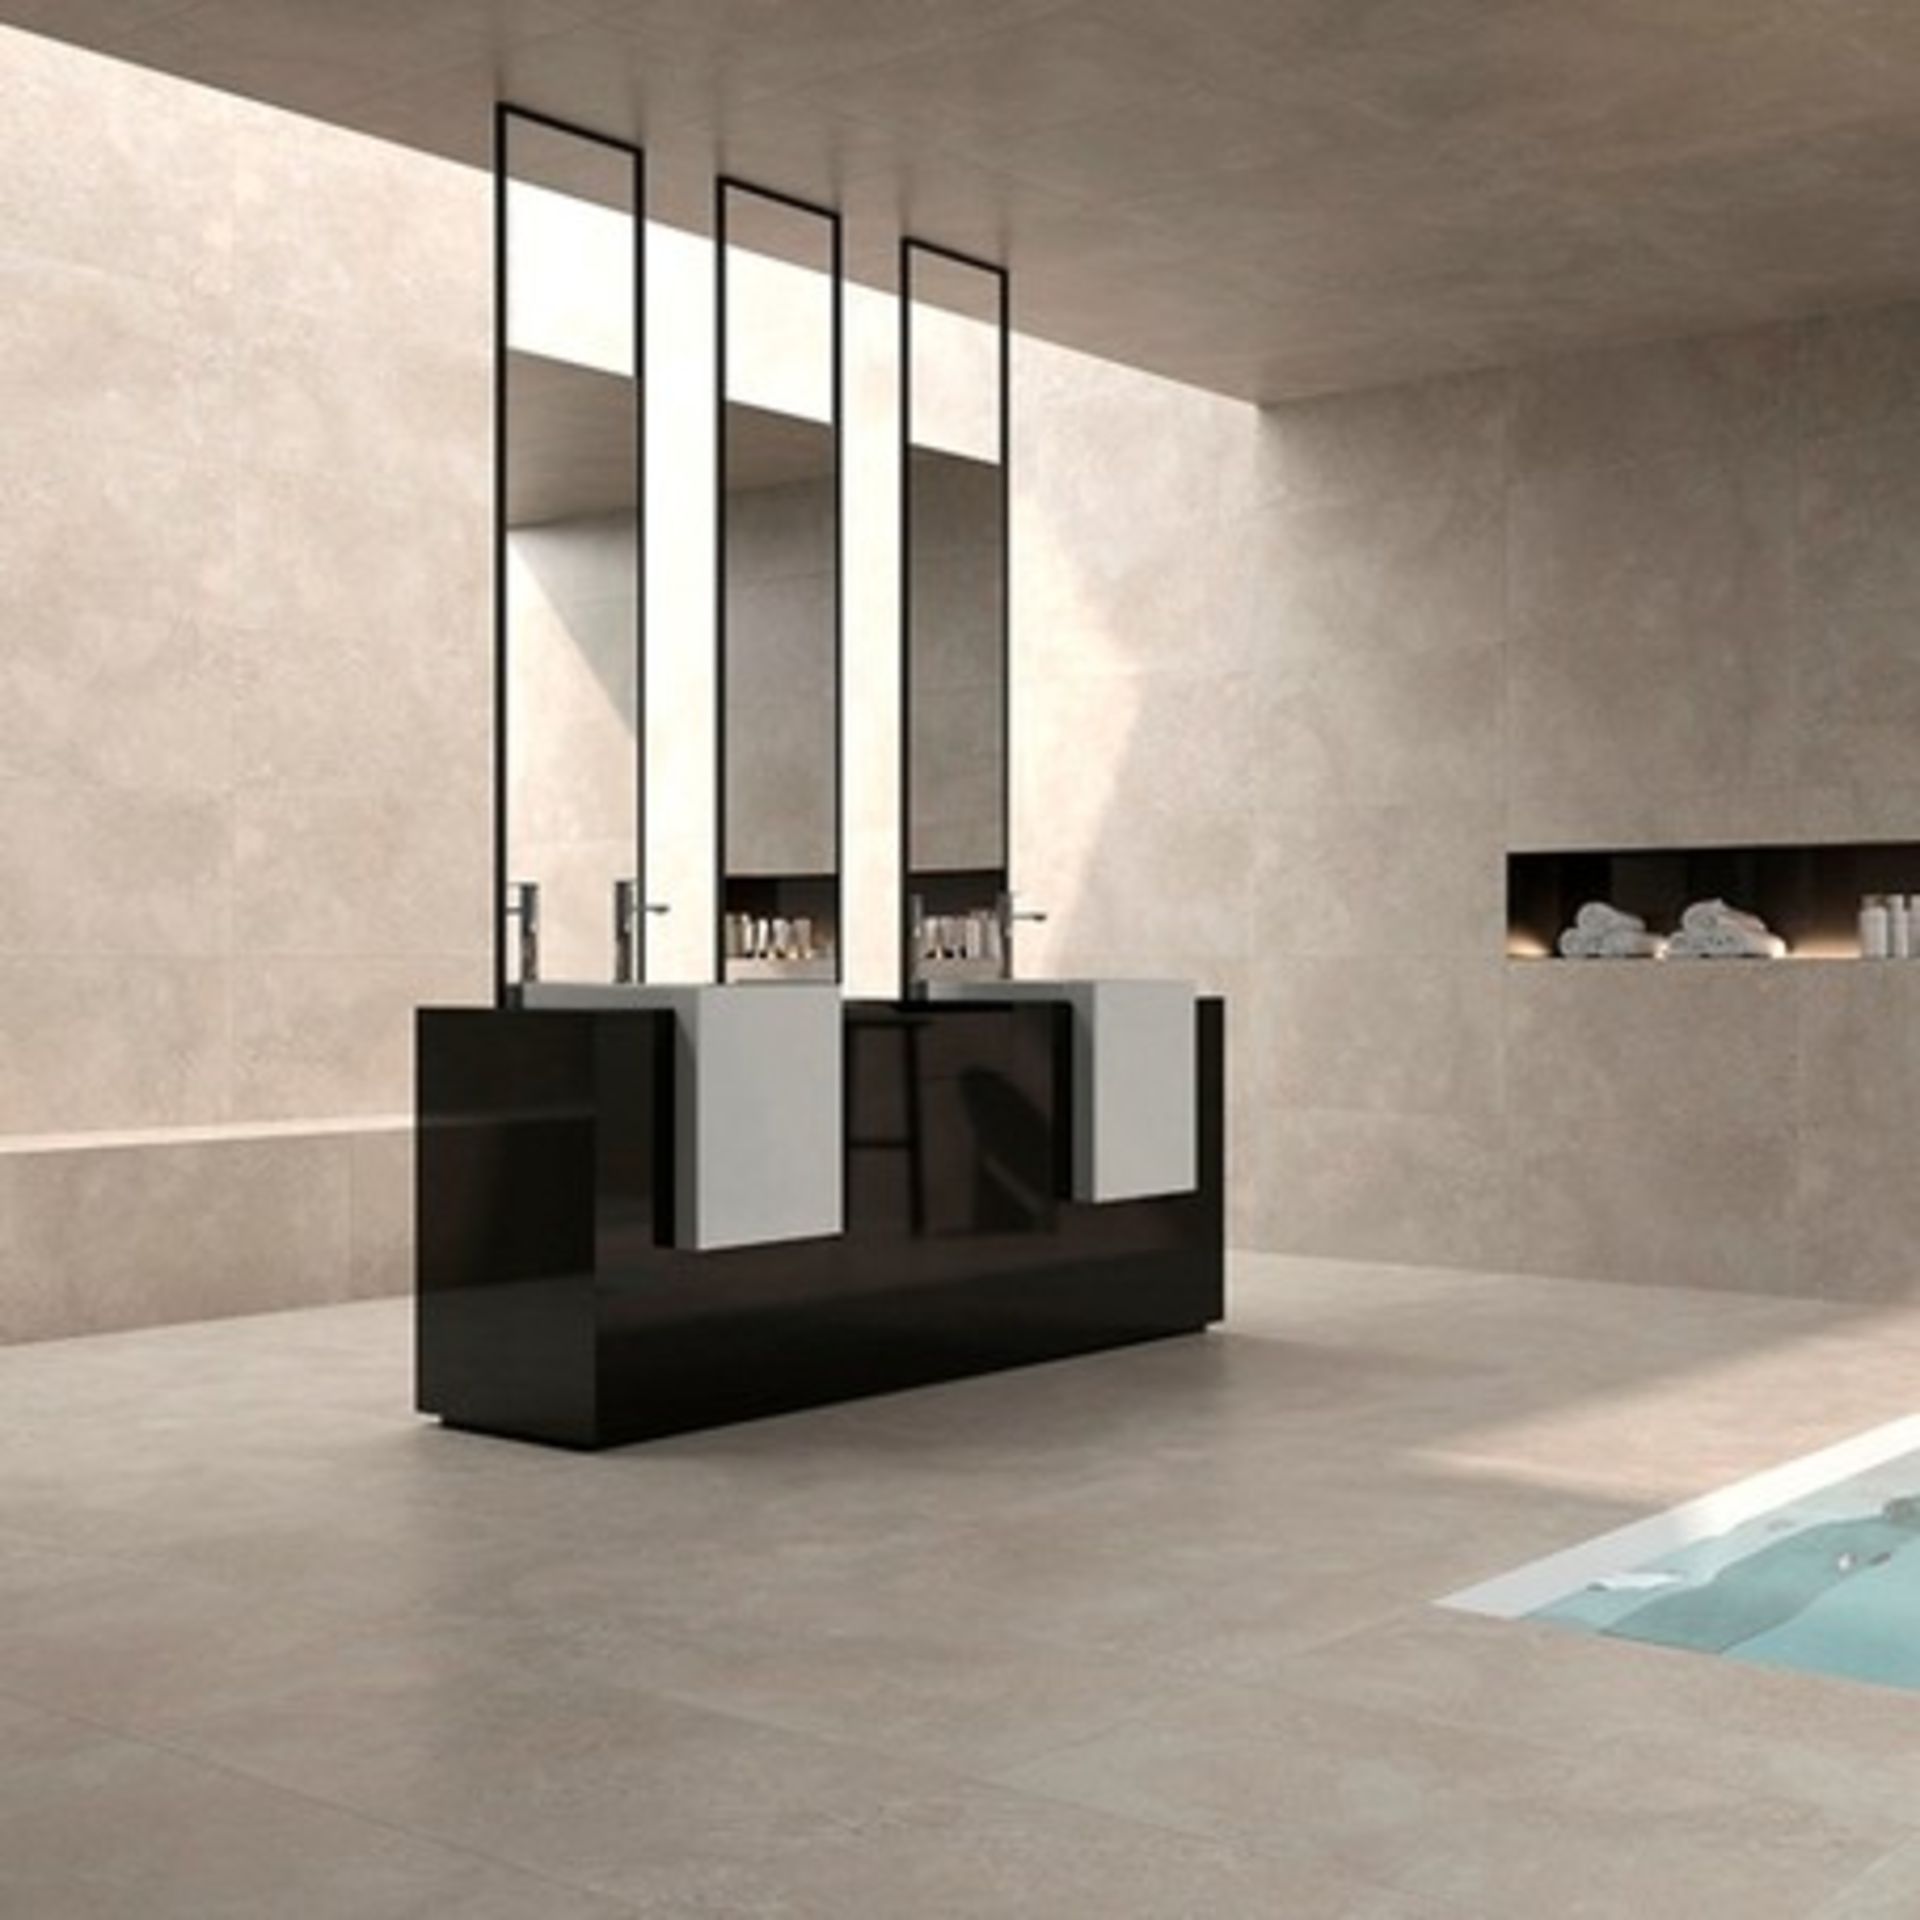 NEW 9m2 Michigan Noce Matte Wall and Floor Tiles. 440x440mm per tile, 8mm thick. These trend ... - Bild 3 aus 3